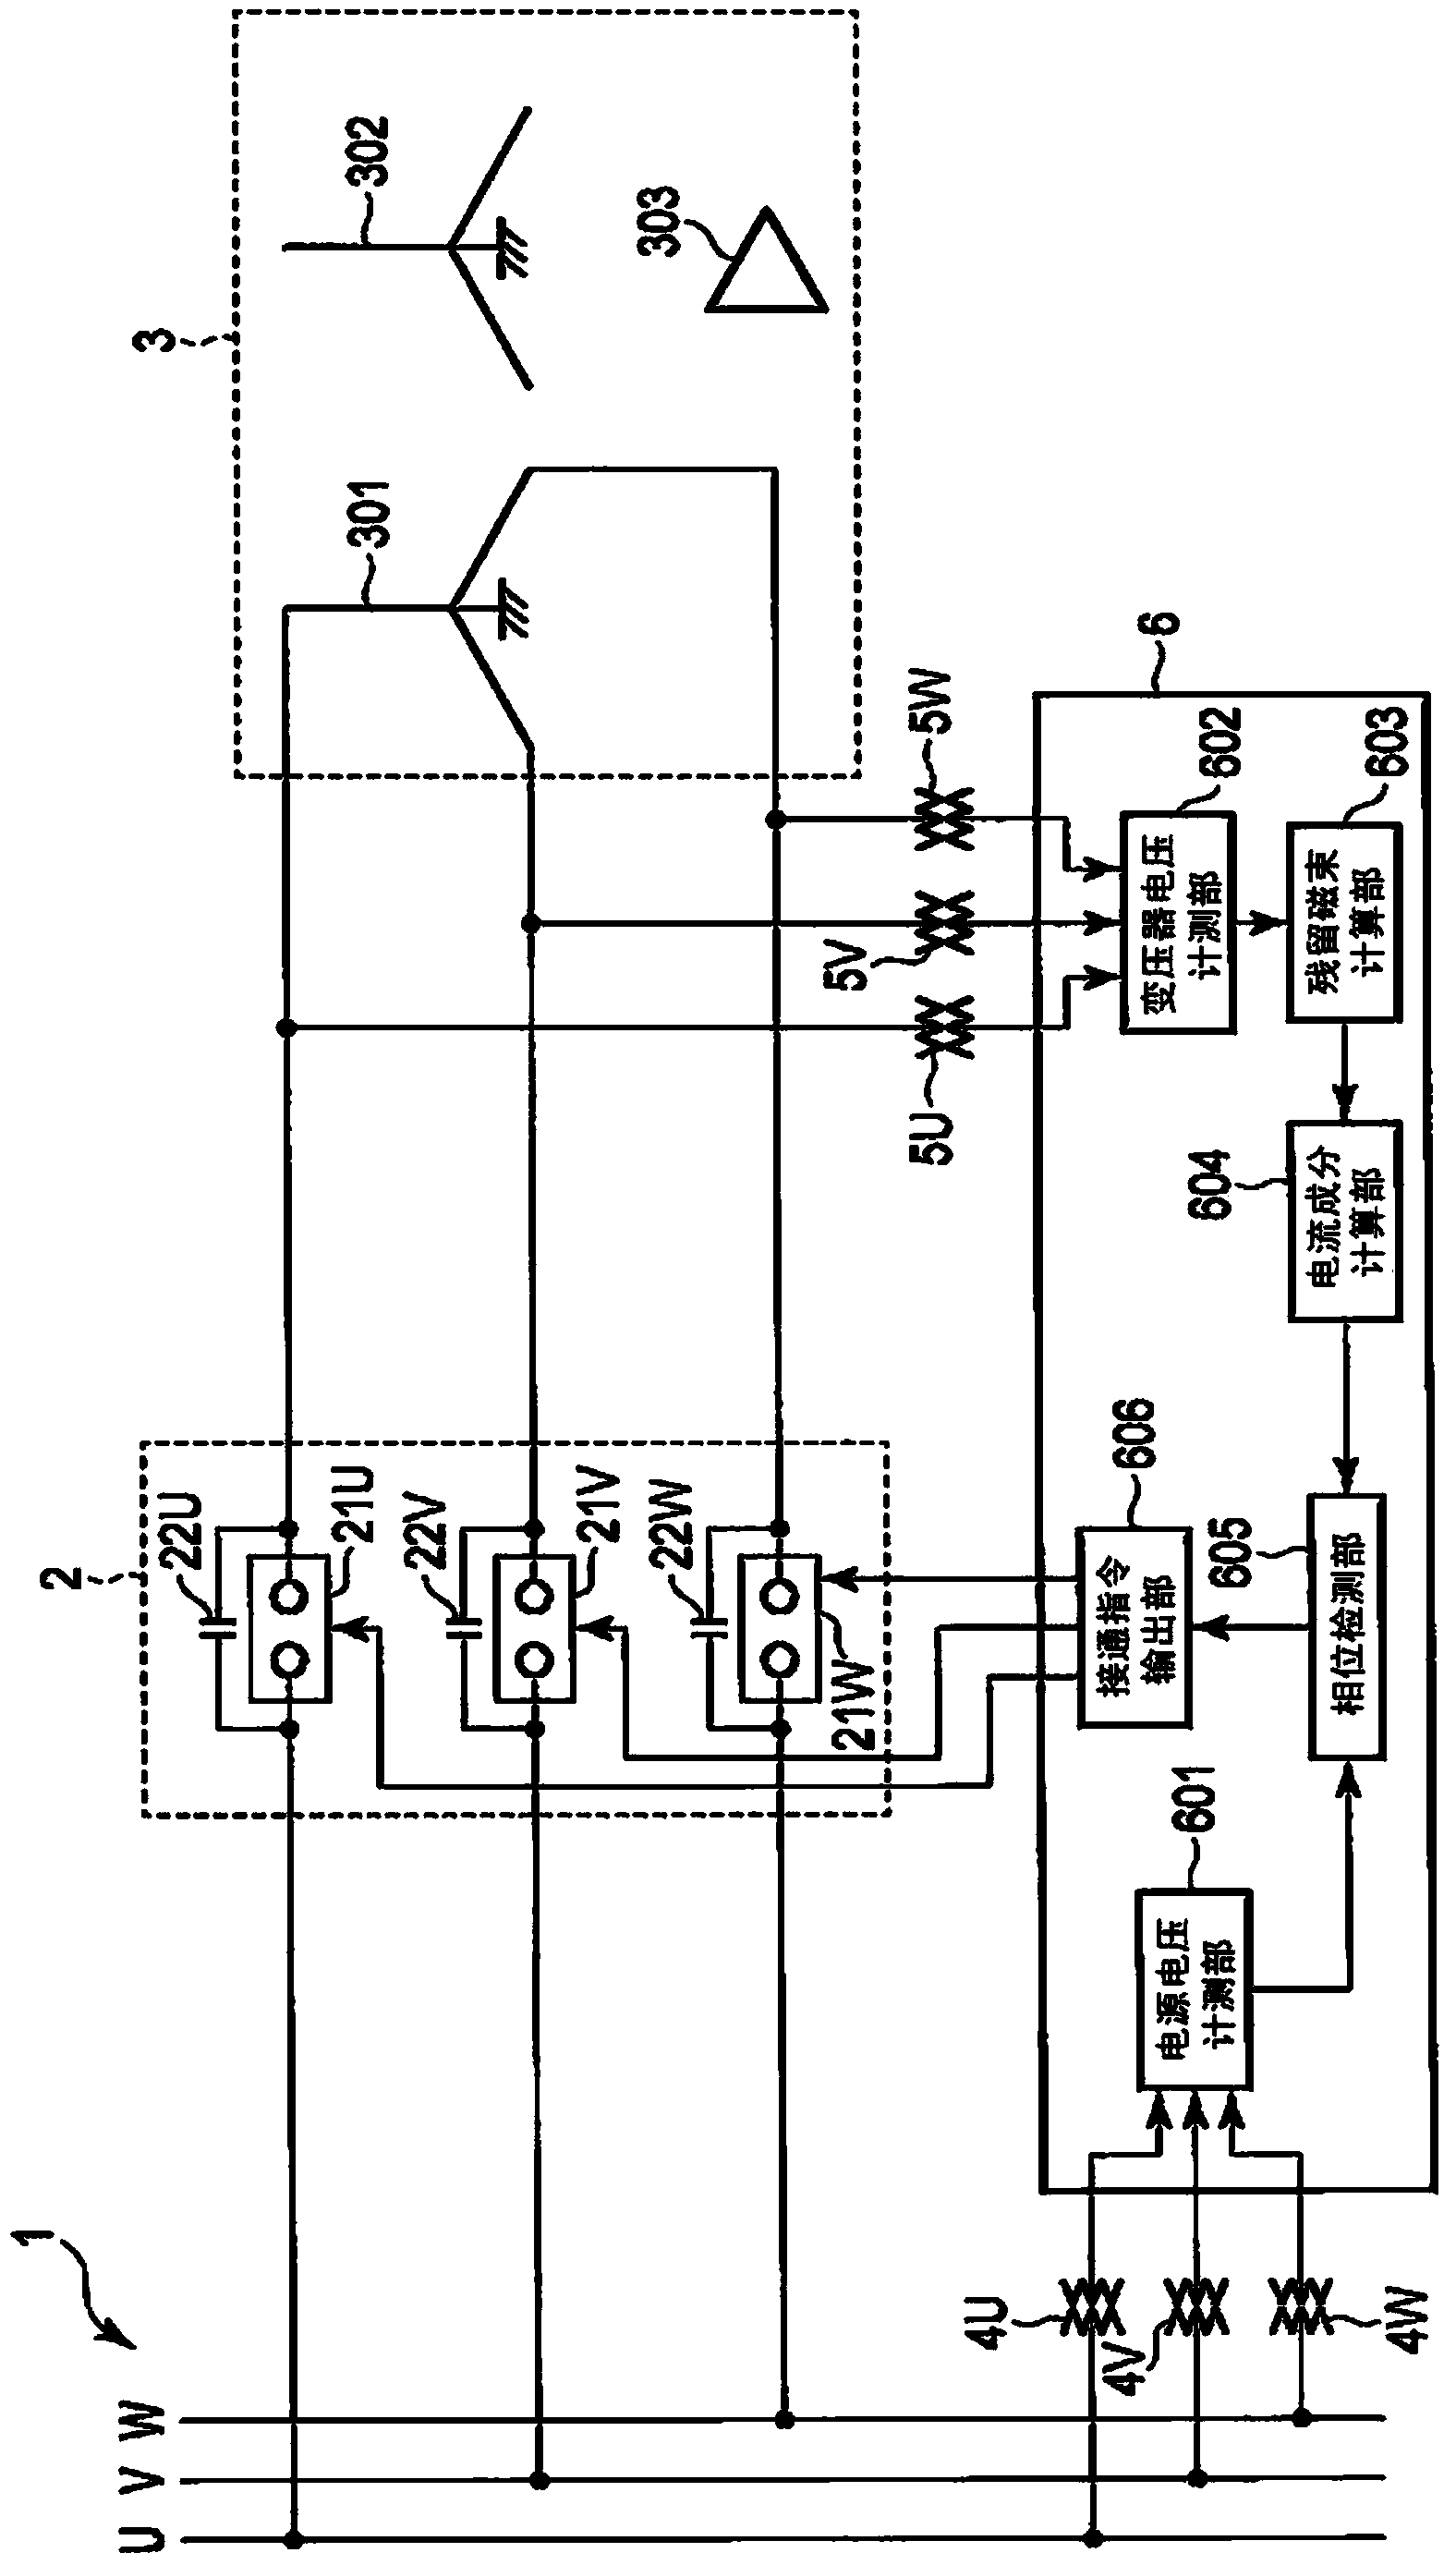 Magnetizing inrush current suppression device